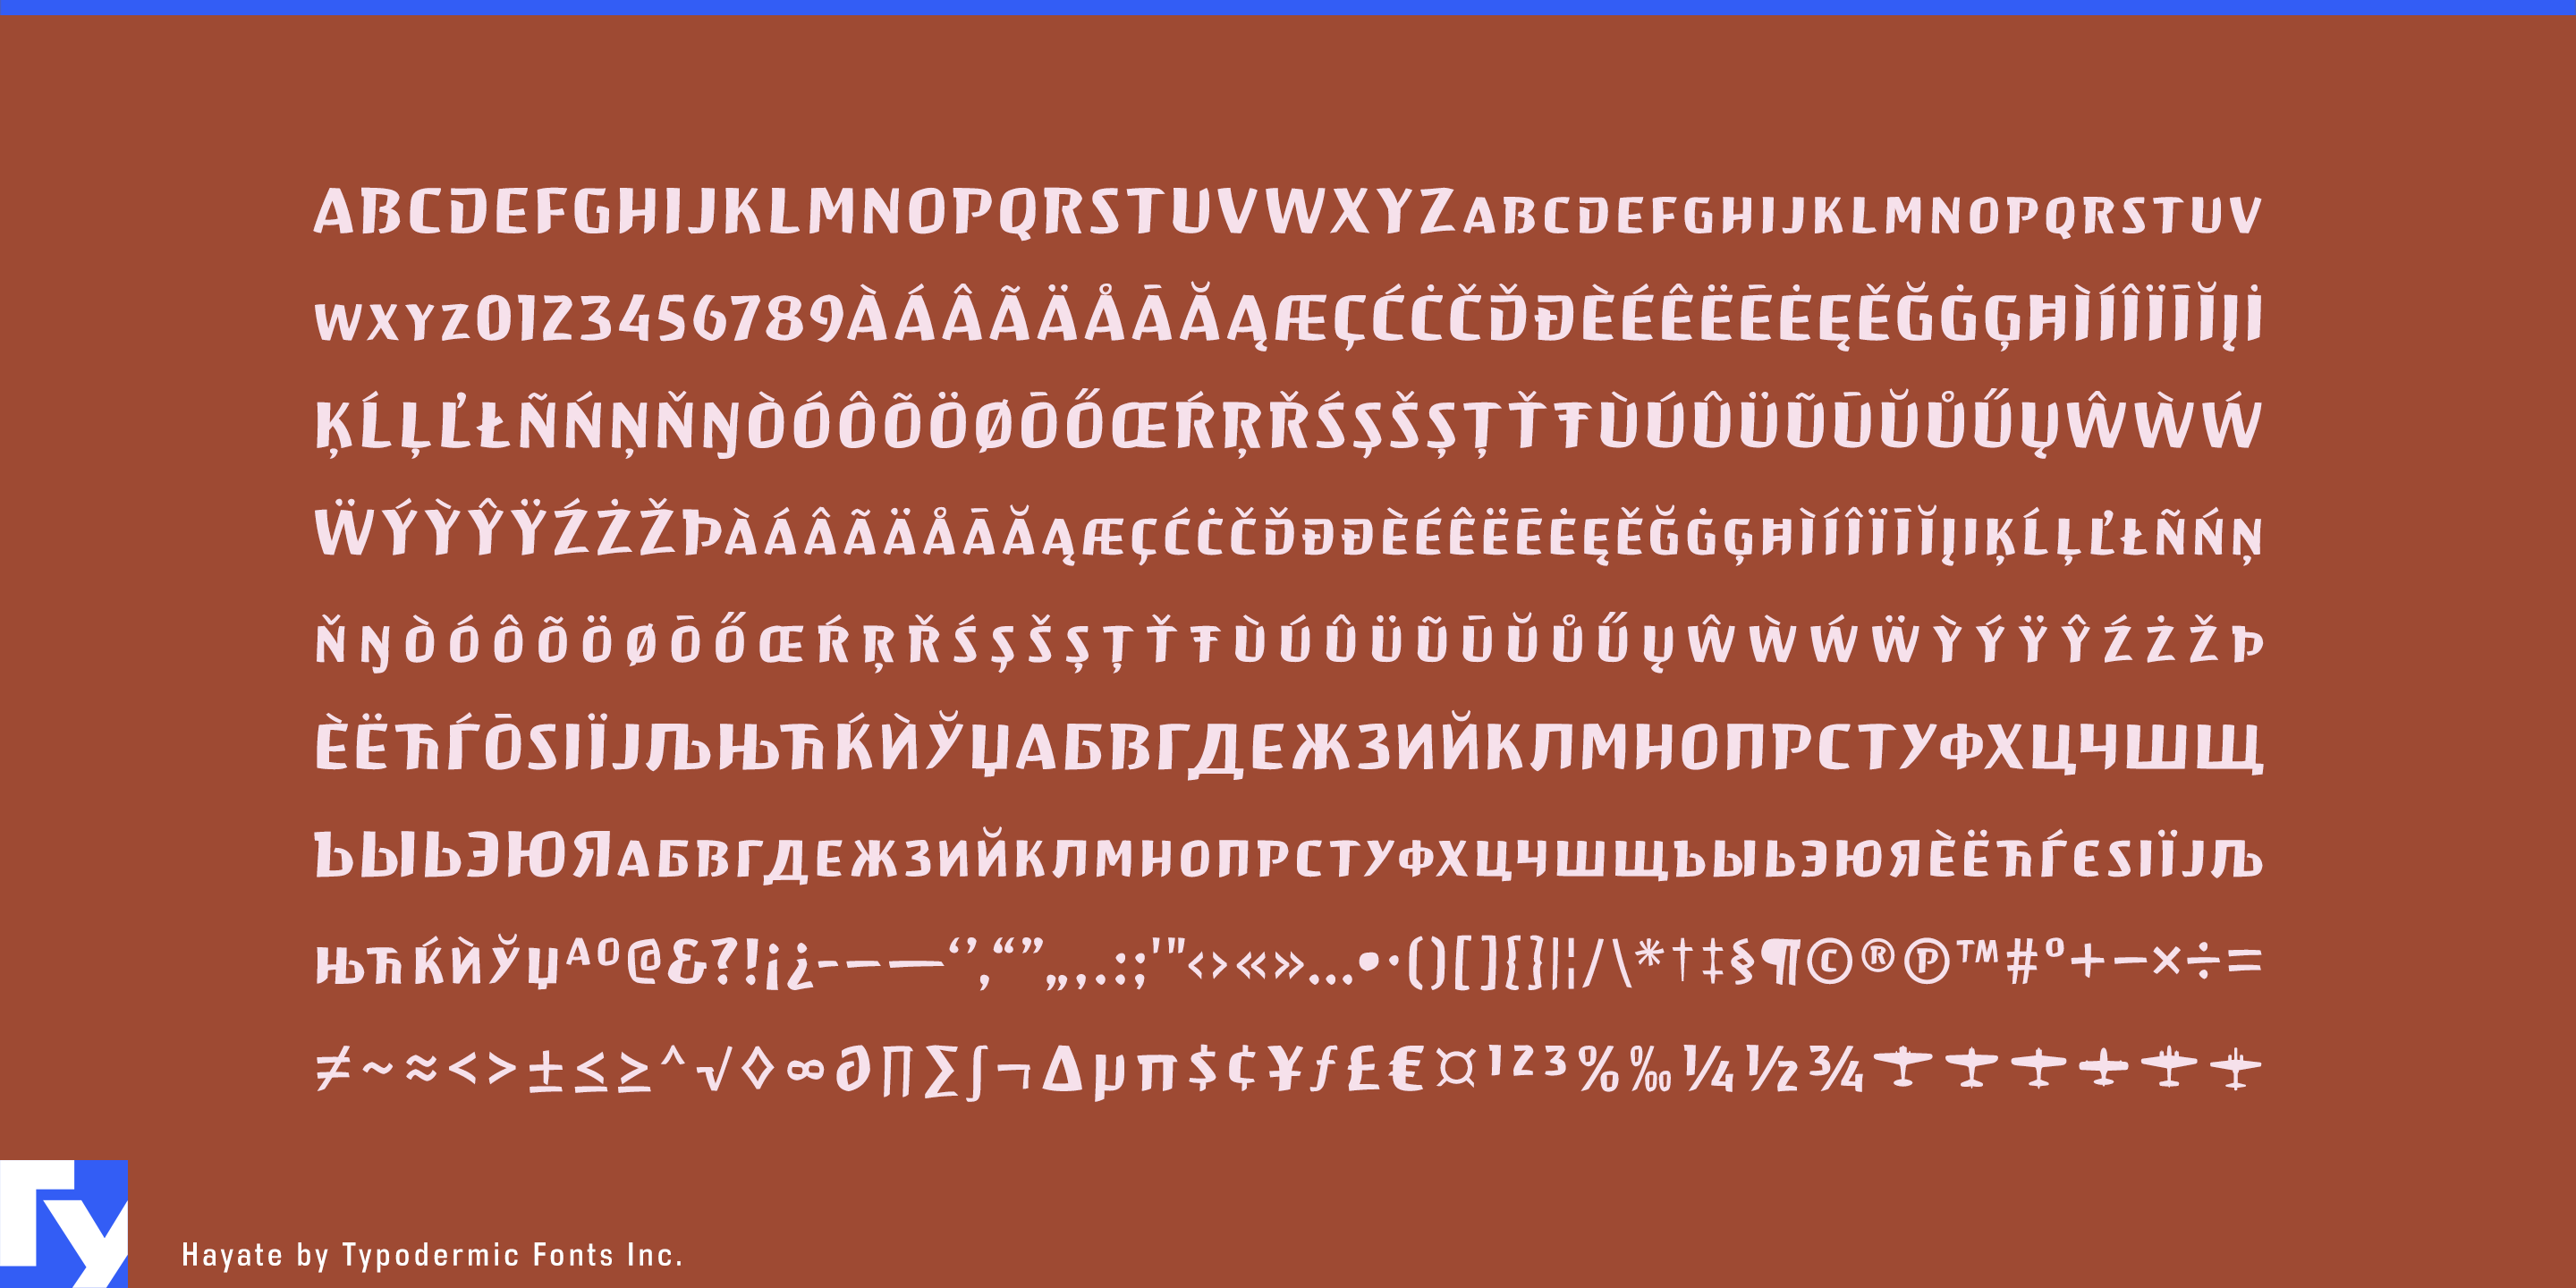 Unleash the Strength of Hayate: A Resilient Small-Cap Typeface